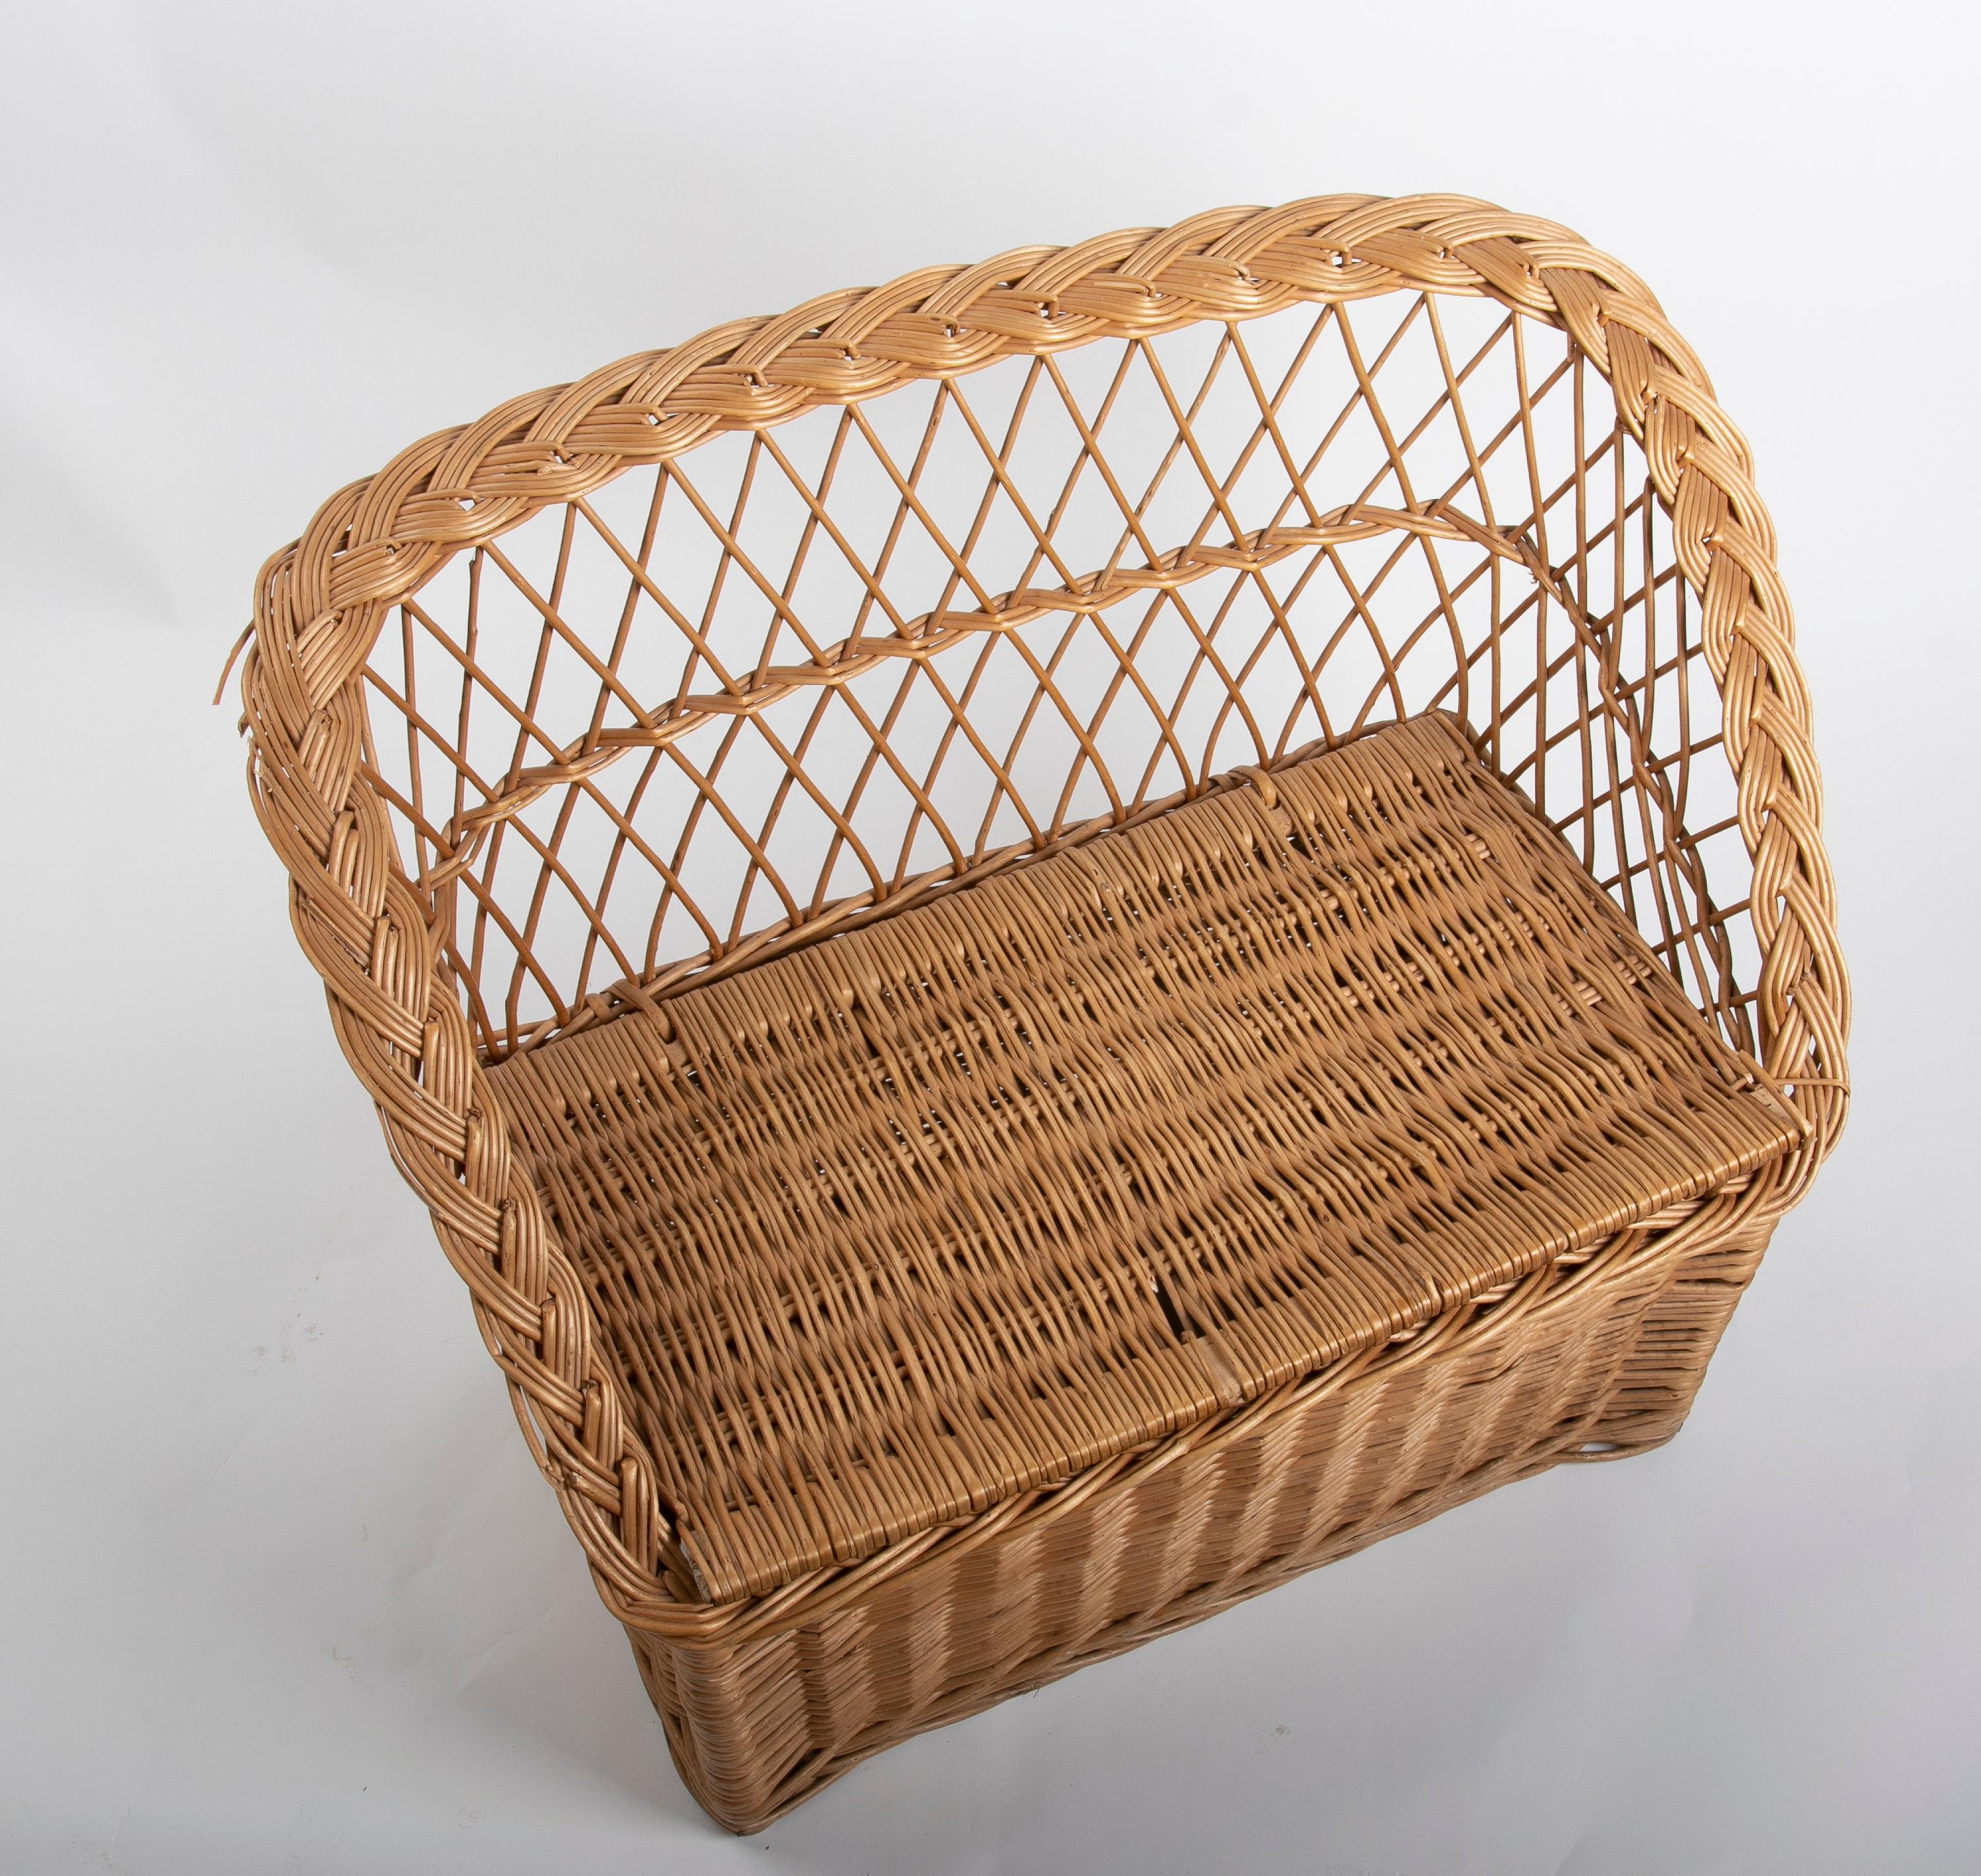 1980s Wicker Sofa for Children with Folding Seat  For Sale 10